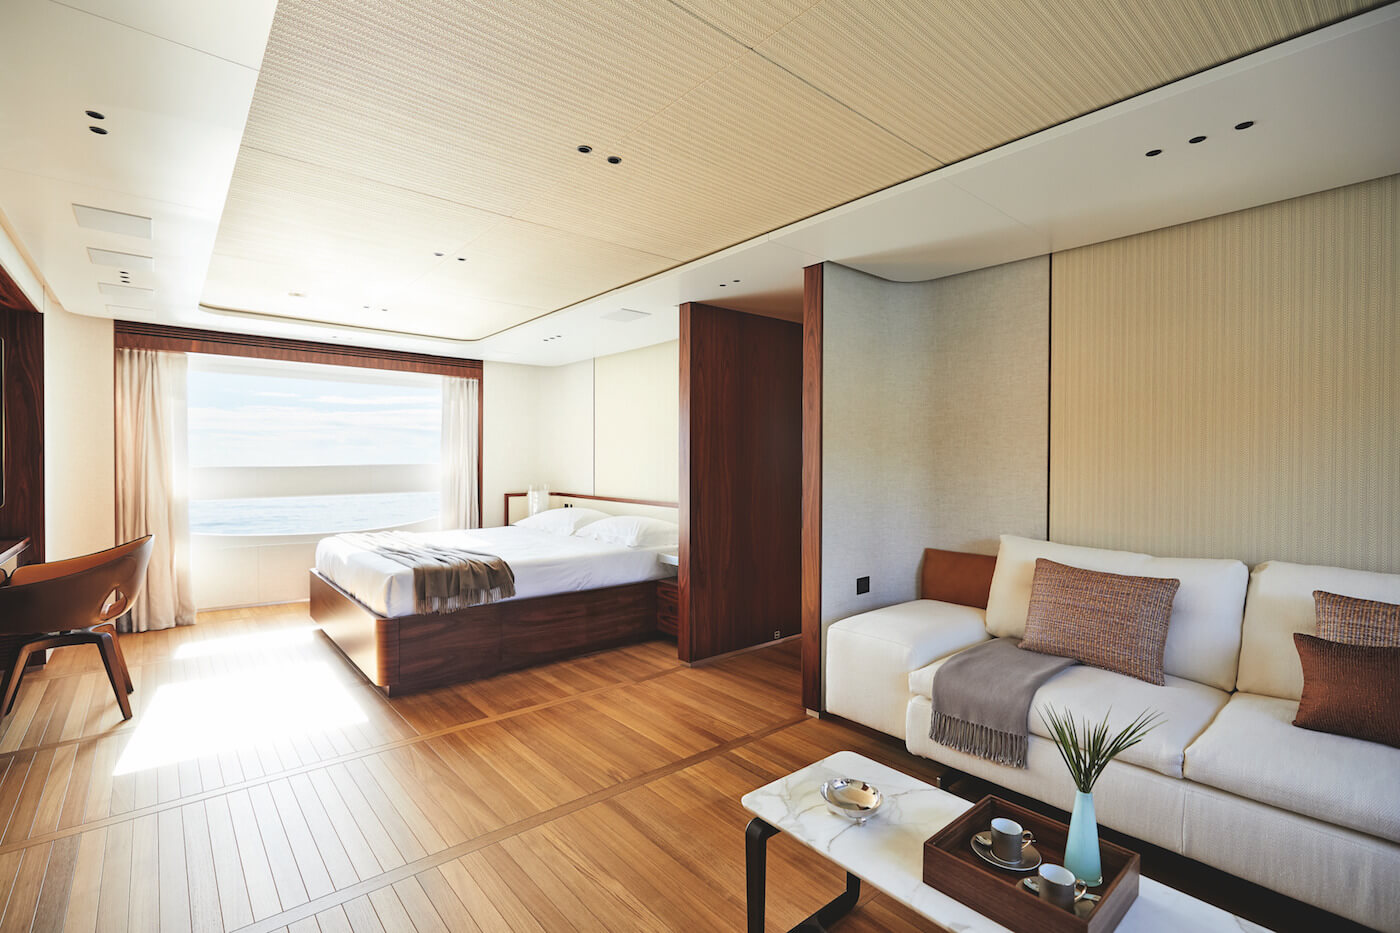 Suite at Luxury Penthouse on-board Benetti yacht